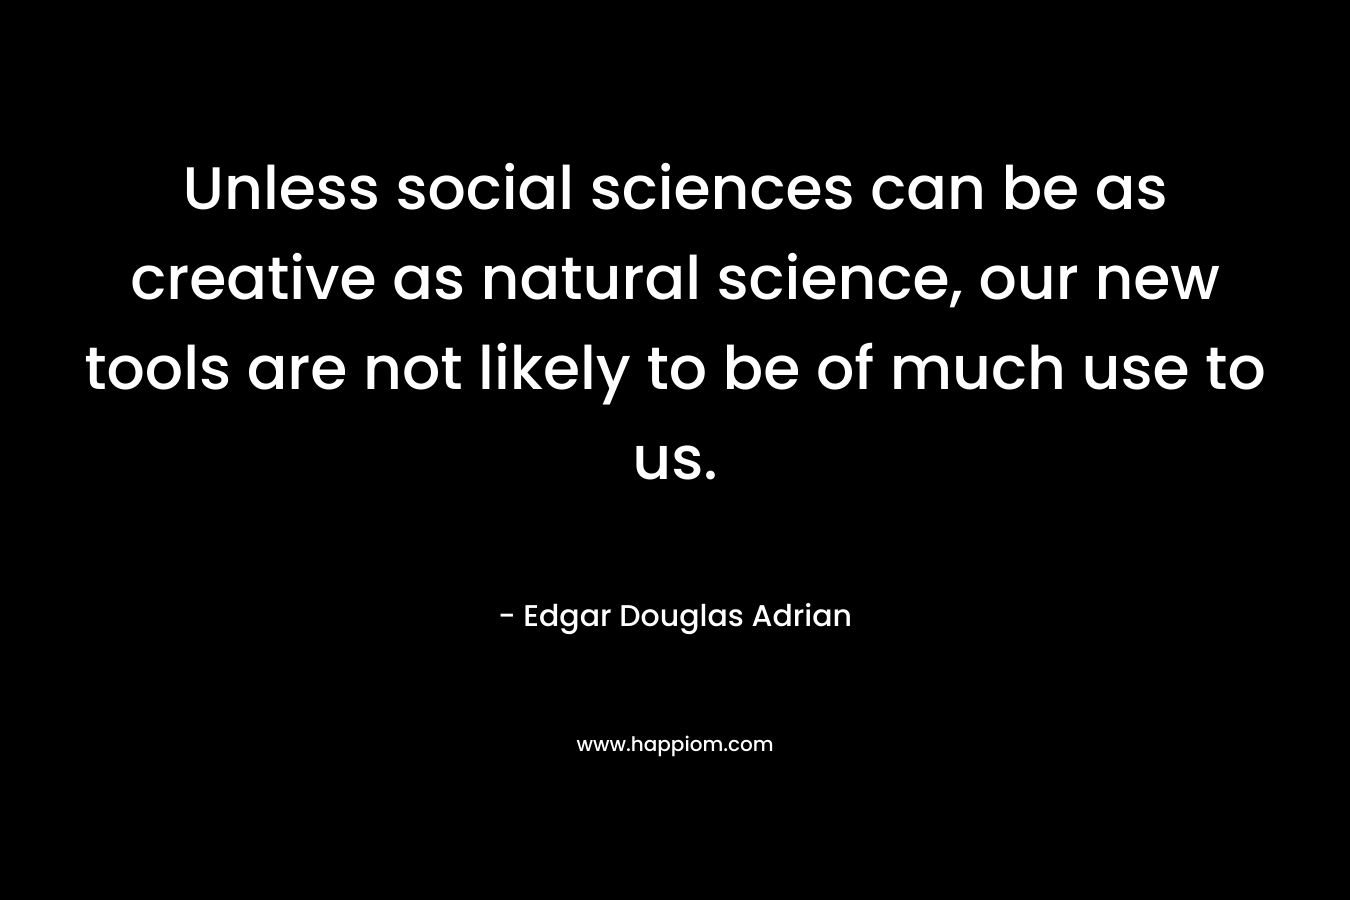 Unless social sciences can be as creative as natural science, our new tools are not likely to be of much use to us.